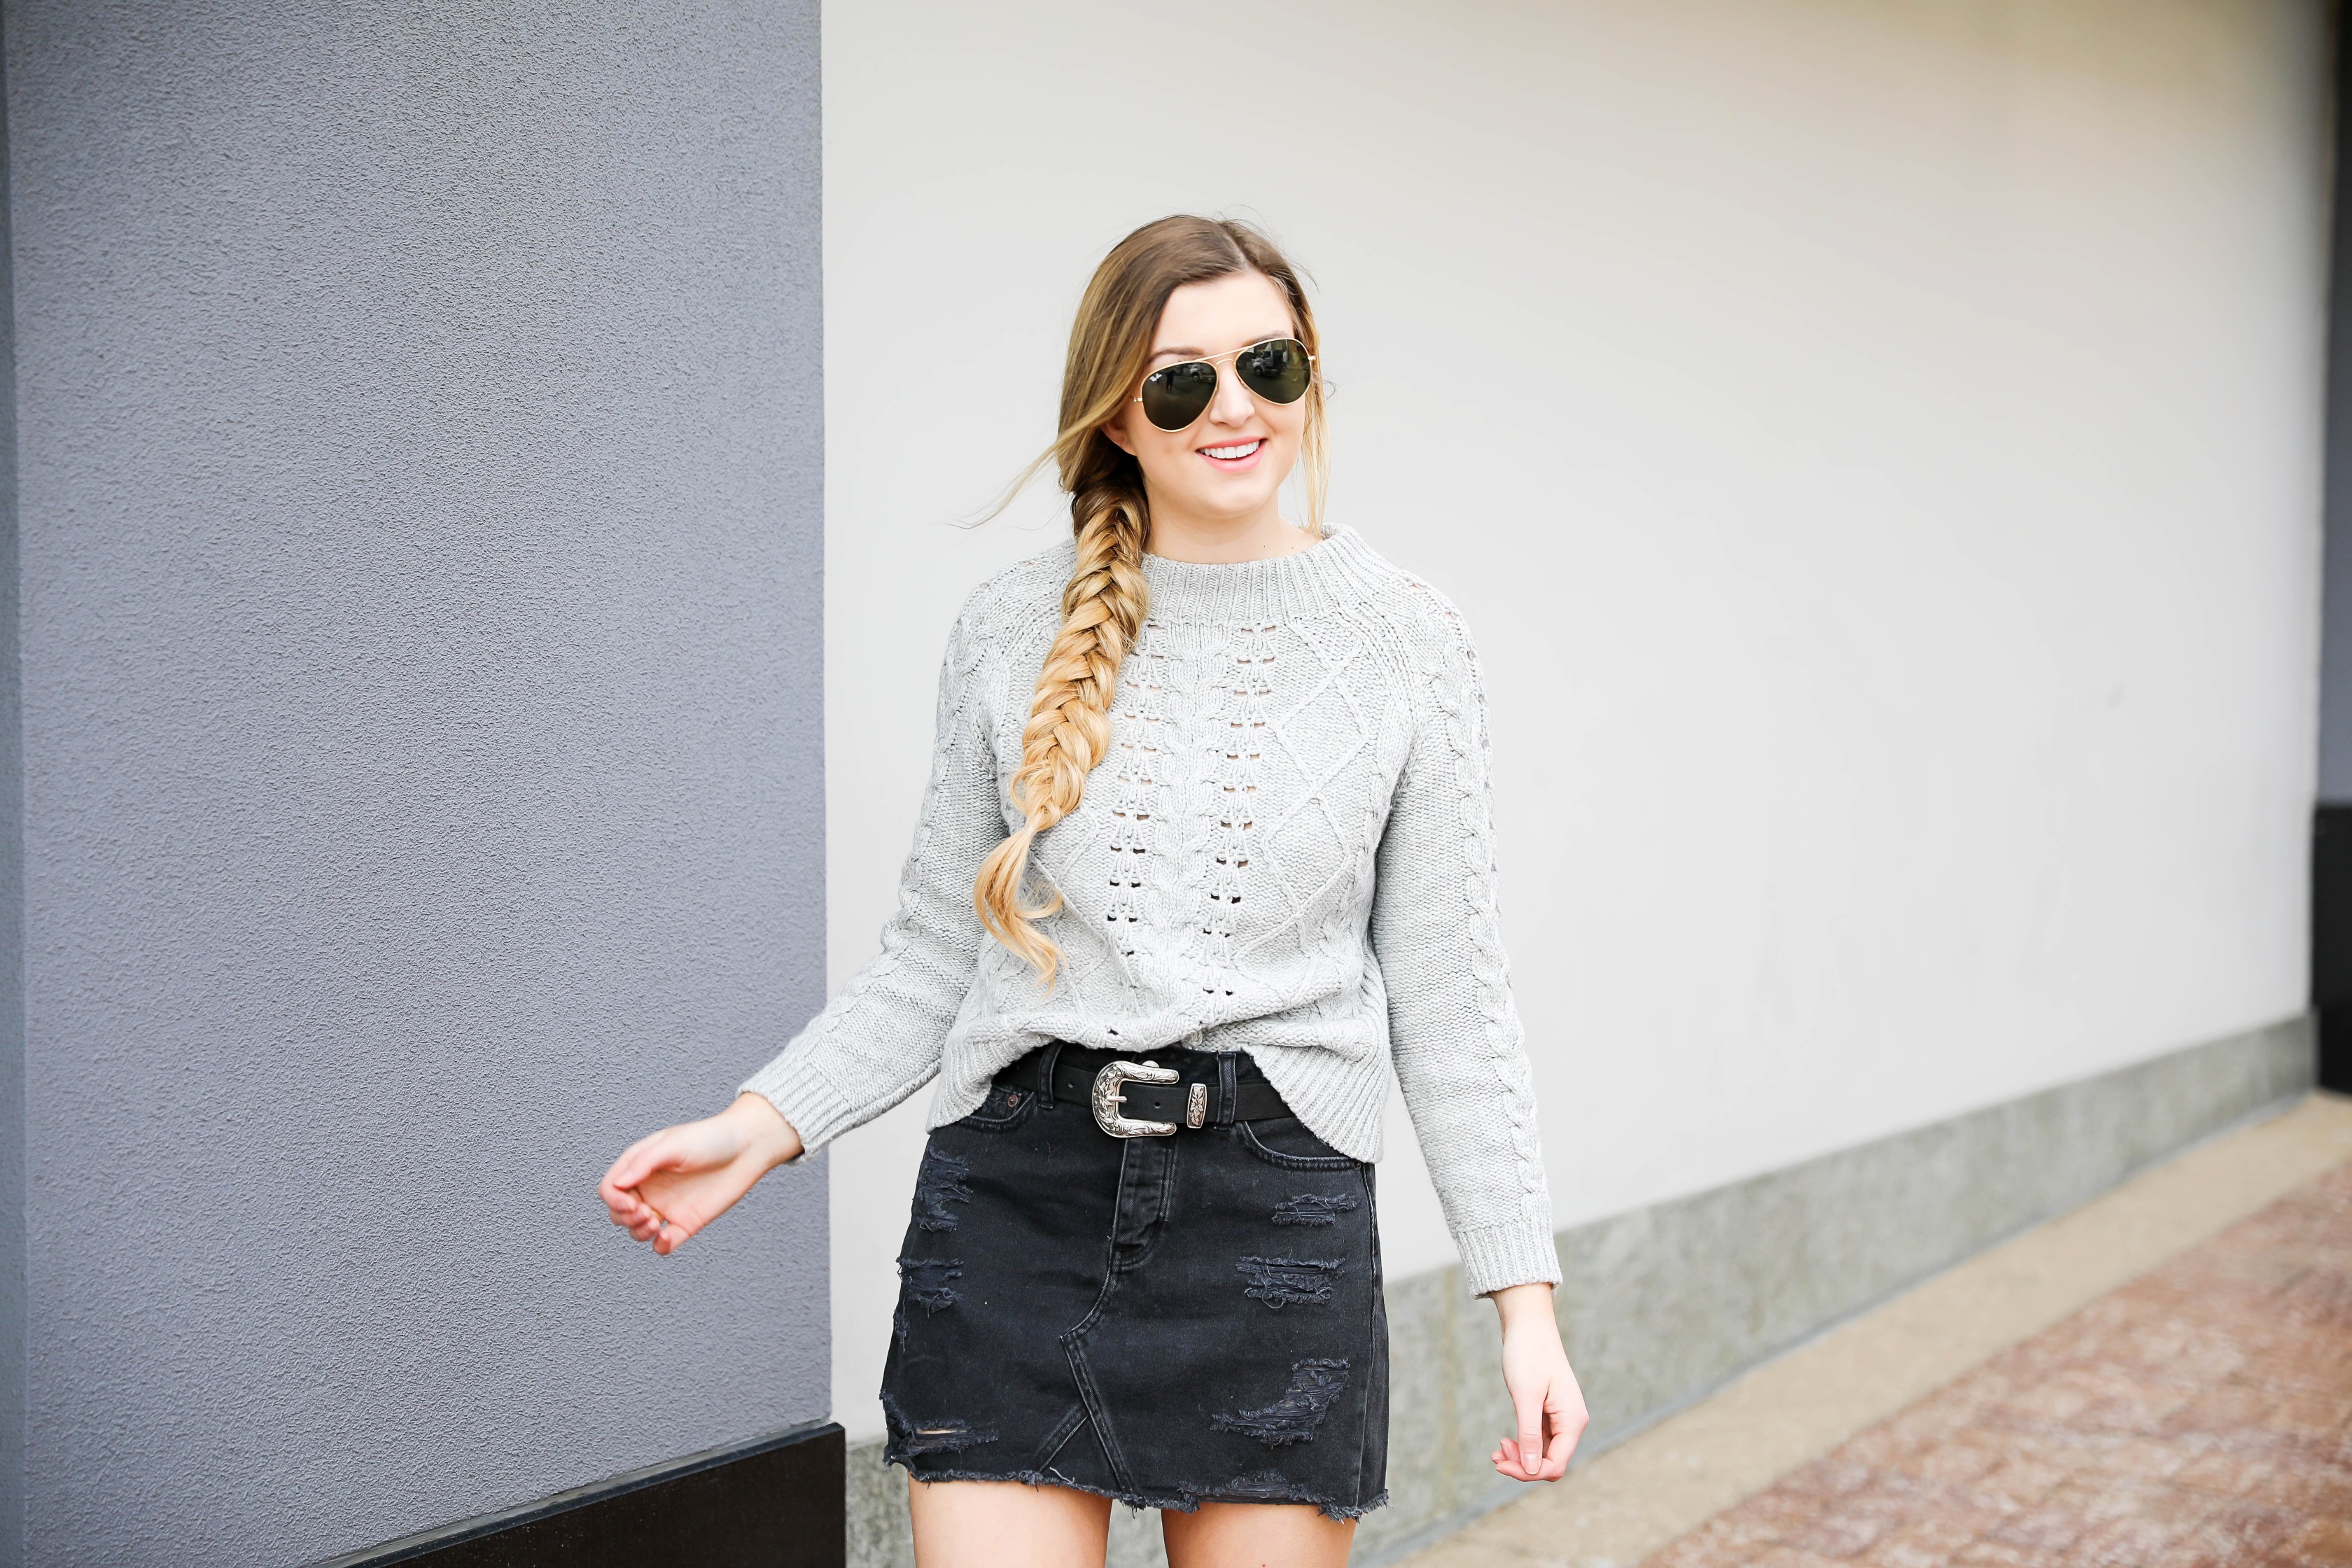 Edgy meets cozy! Adorable ripped black denim skirt with over the knee black boots! Paired with a cozy grey J.Crew cable knit sweater! Details on fashion blog daily dose of charm by lauren lindmark